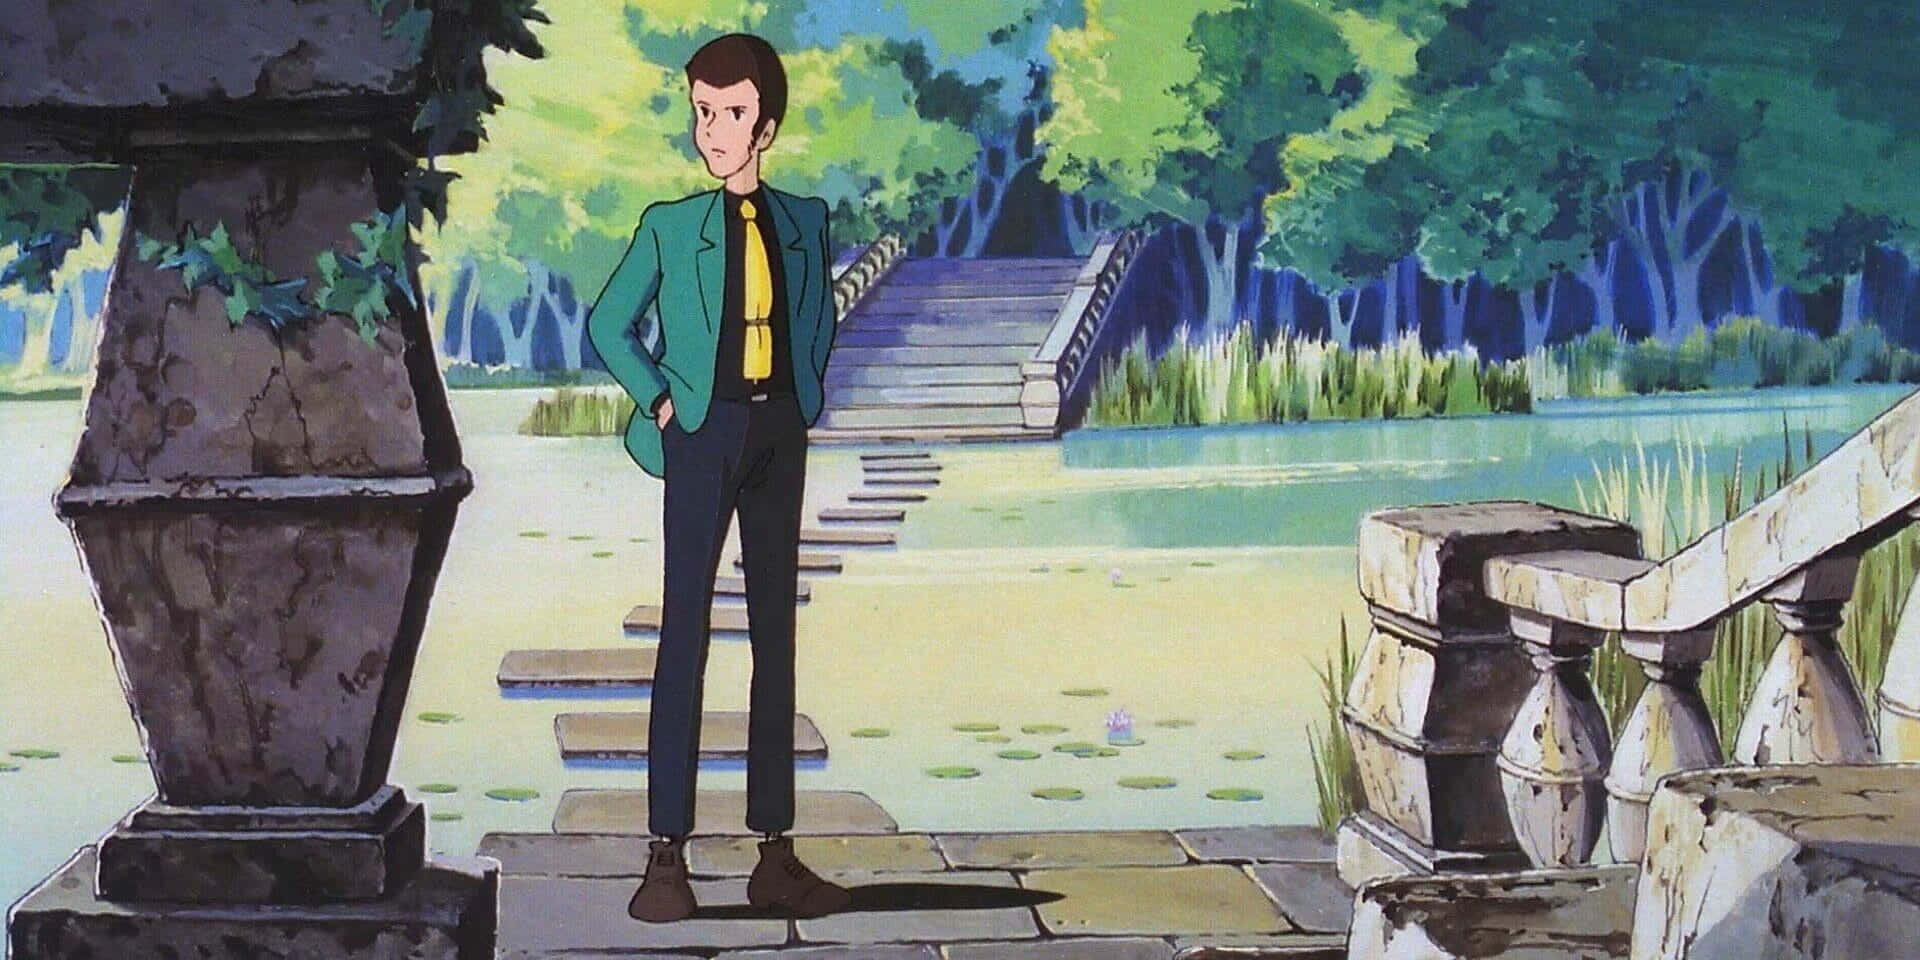 Lupin III and his crew in action at The Castle of Cagliostro Wallpaper